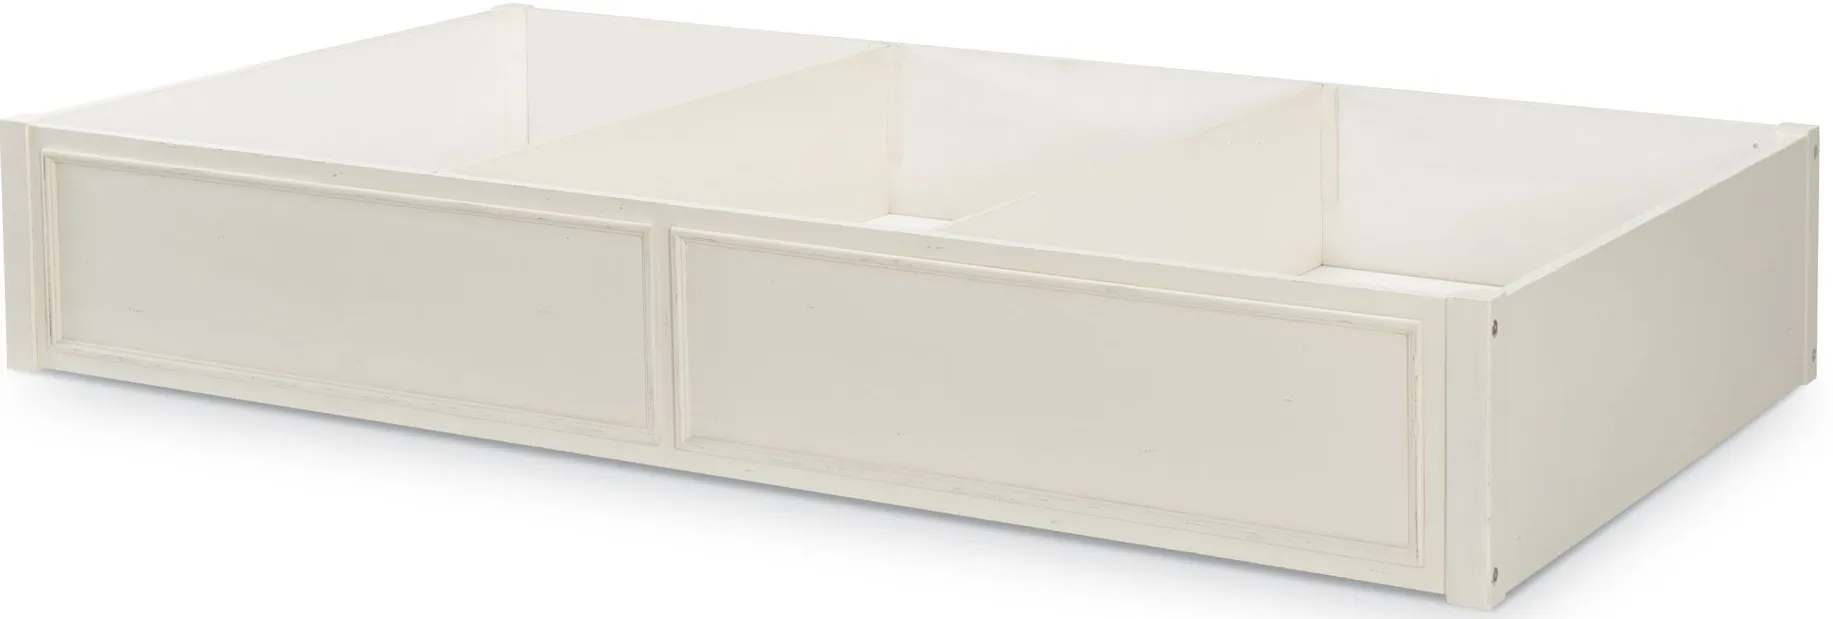 Lake House St Trundle/Storage Drawer in Pebble White by Legacy Classic Furniture